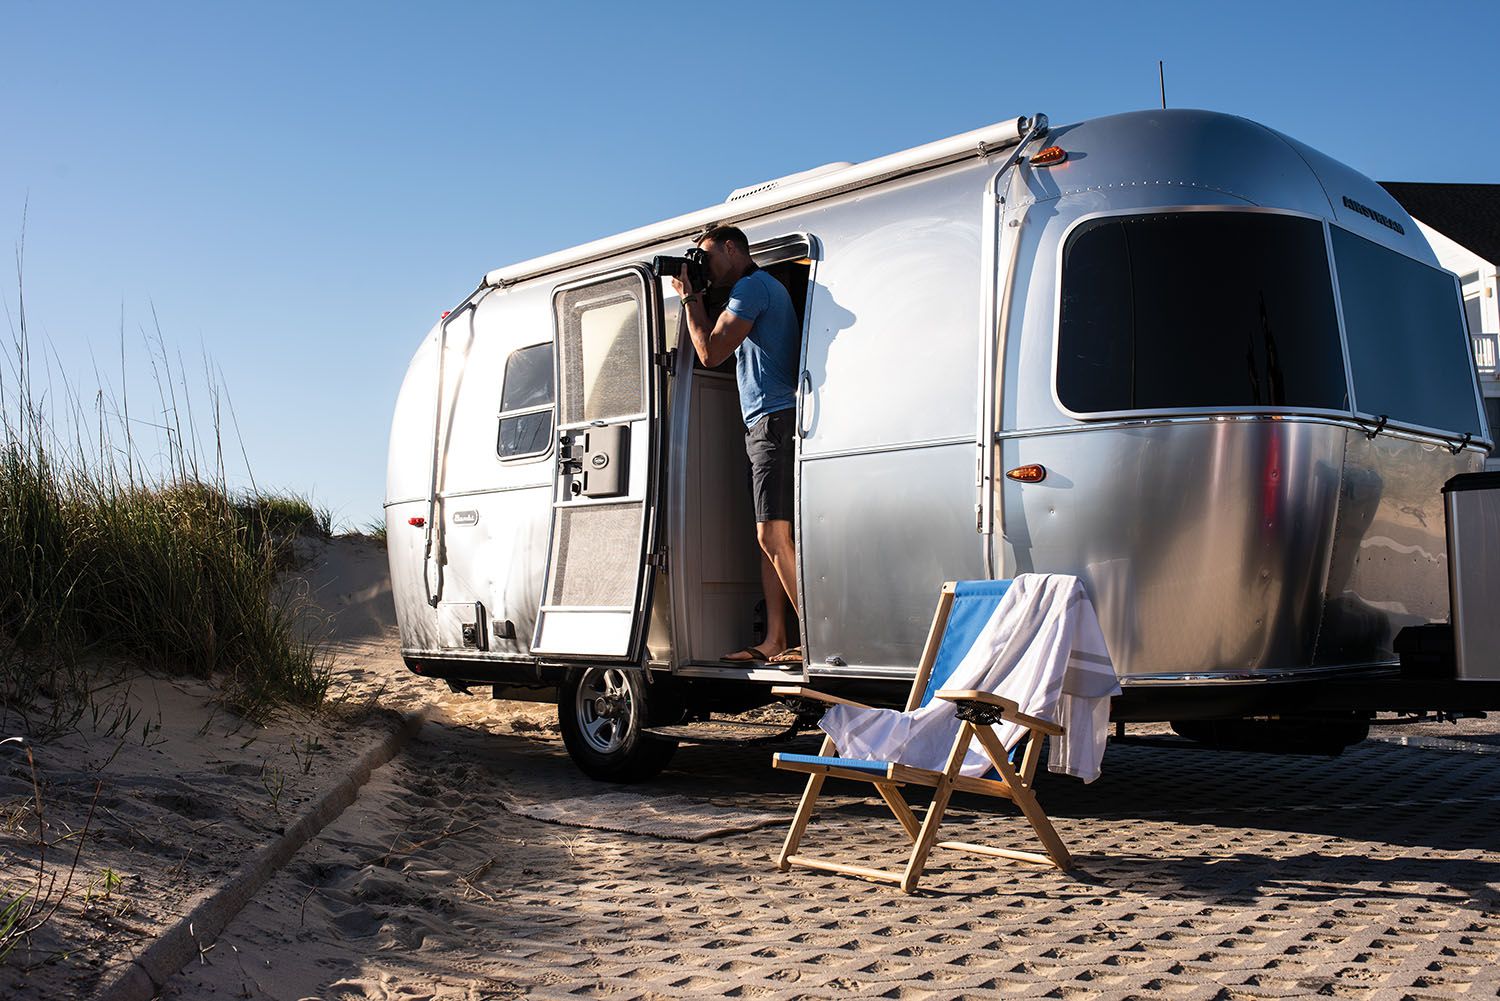 <p>The classic <a href="https://www.airstream.com/">silver bullet</a> company offers these three models that range in starting price from $59,300 to $74,000. All three are 16-footers, although <a href="https://www.airstream.com/travel-trailers/bambi/">the Bambi</a> can sleep four at that size, and also comes in 19-, 20- and 22-foot versions. </p>